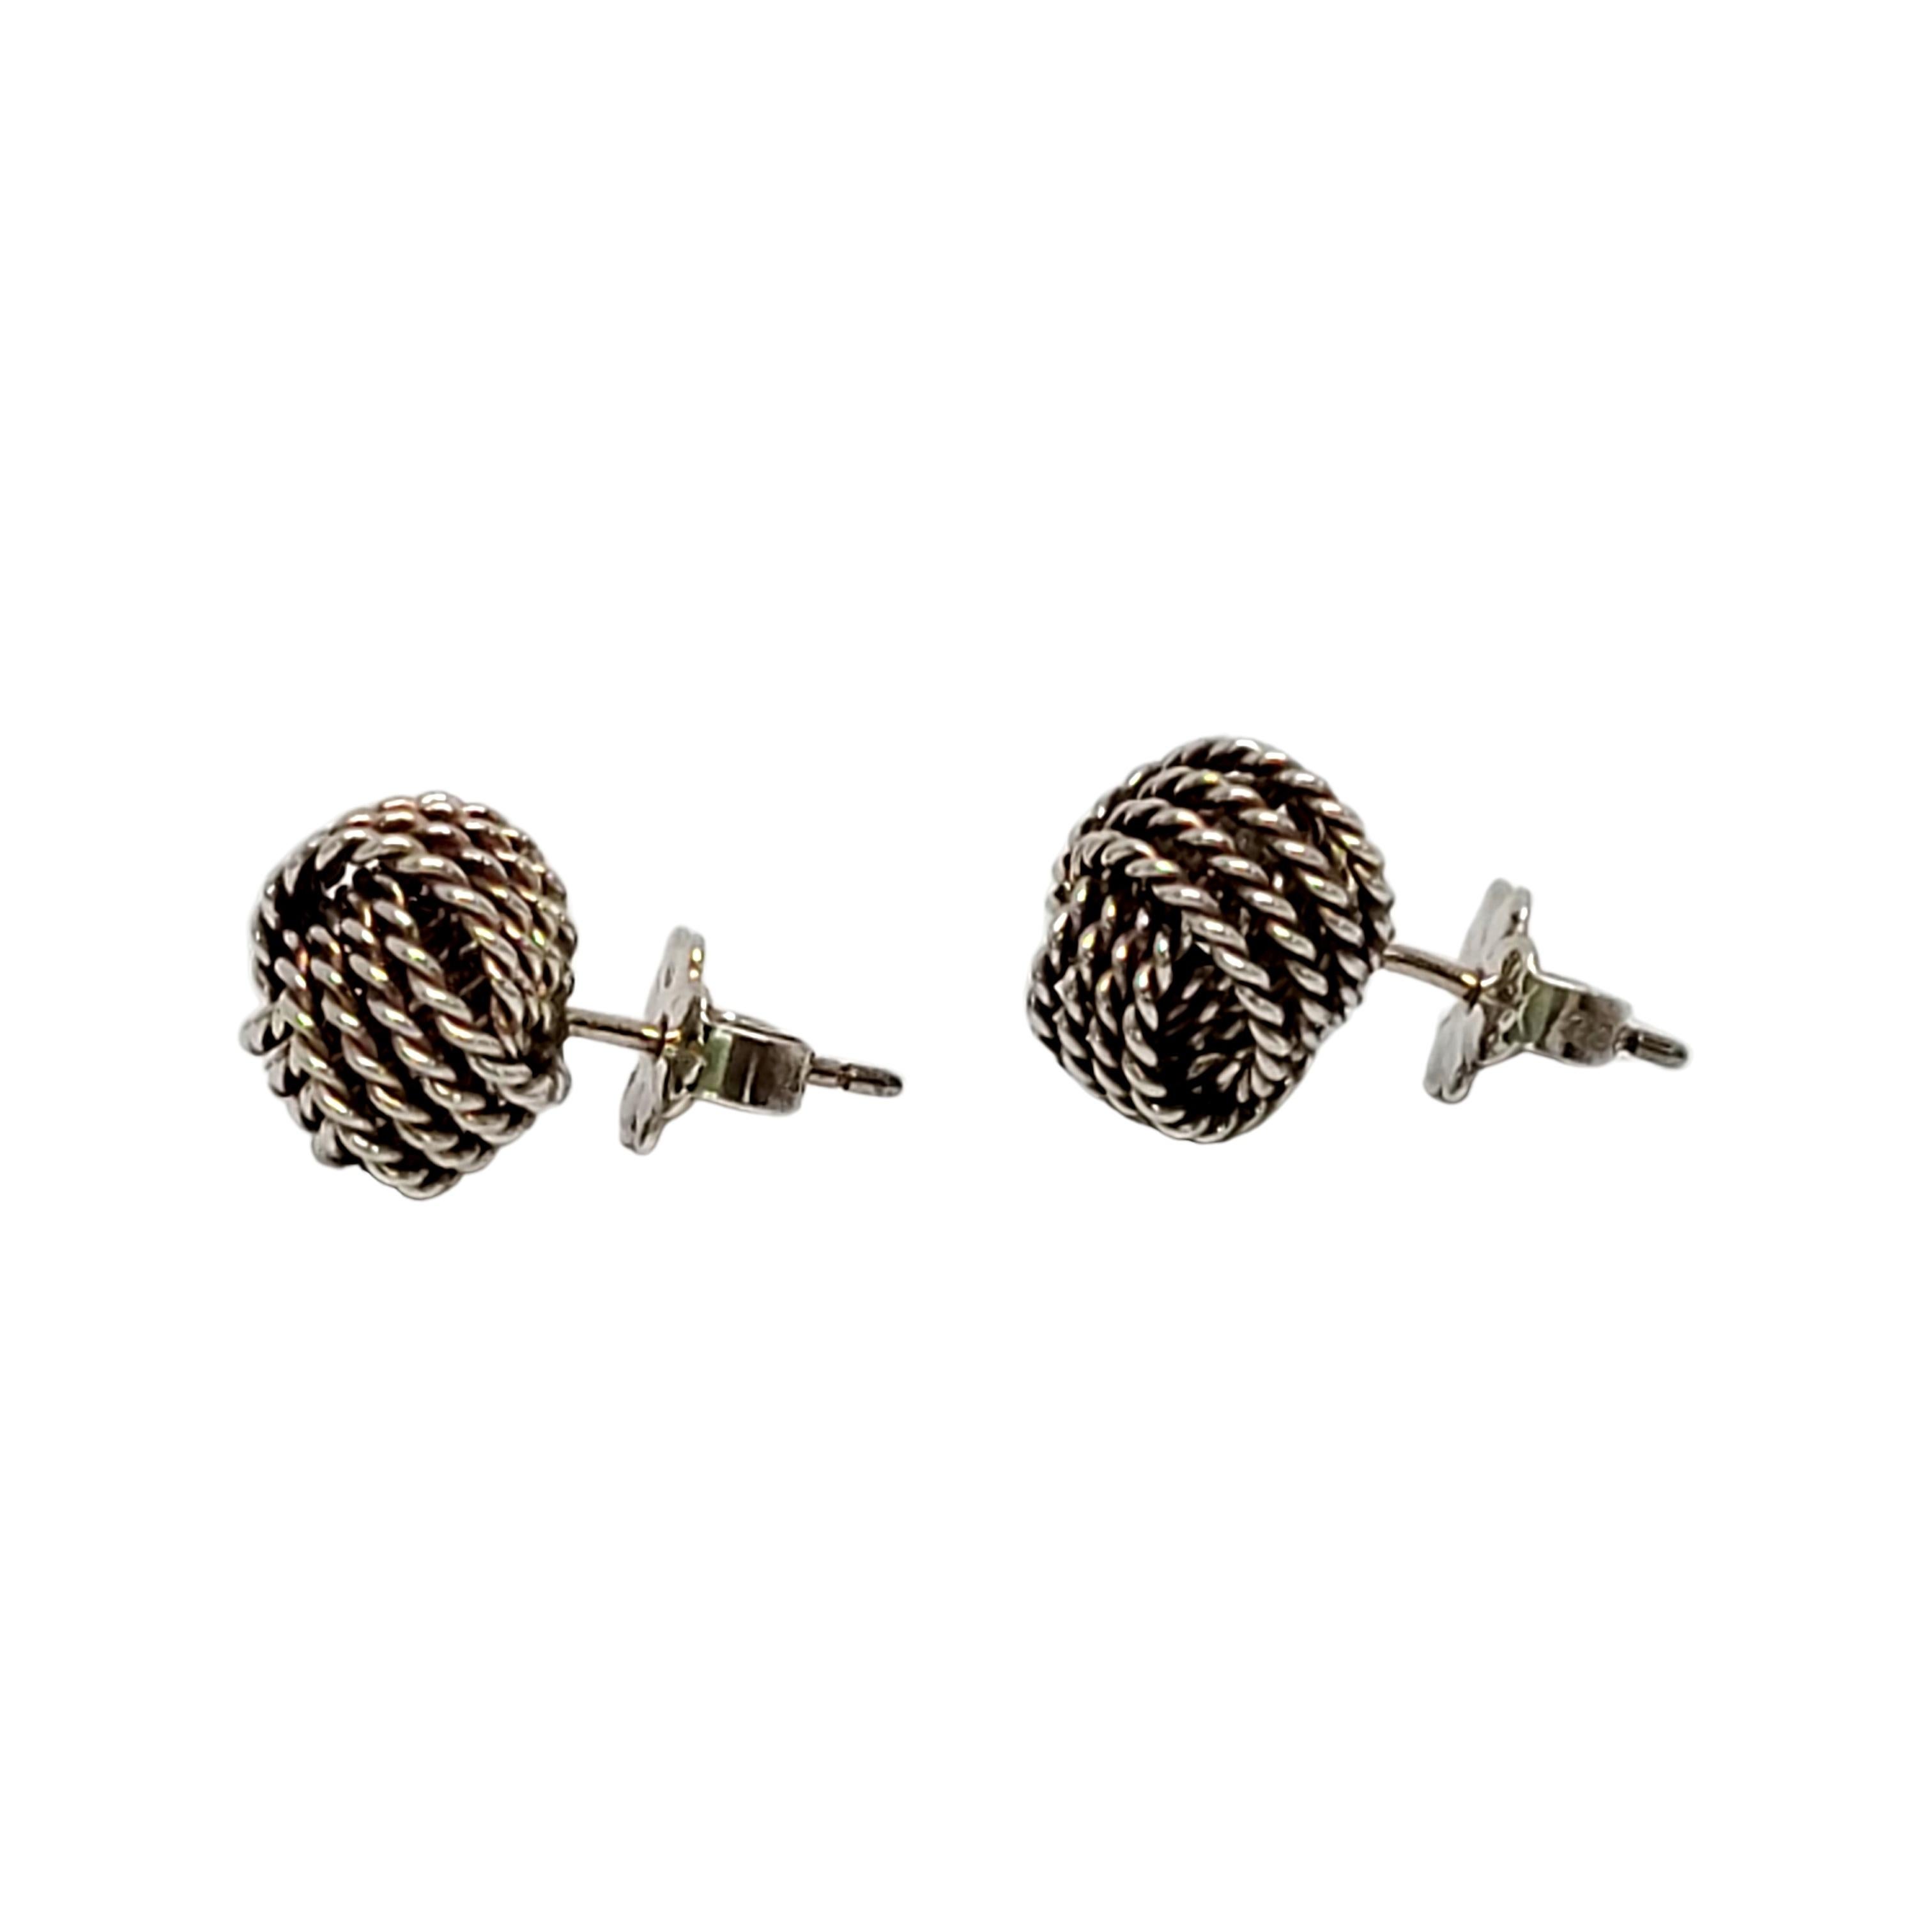 Tiffany & Co sterling silver twist knot stud earrings.

Authentic Tiffany earrings with a modern and timeless mesh knot design.  Tiffany box and pouch not included.

Measures approx 9mm in diameter.

Weighs approx 2.8g, 1.8dwt

Very nice condition